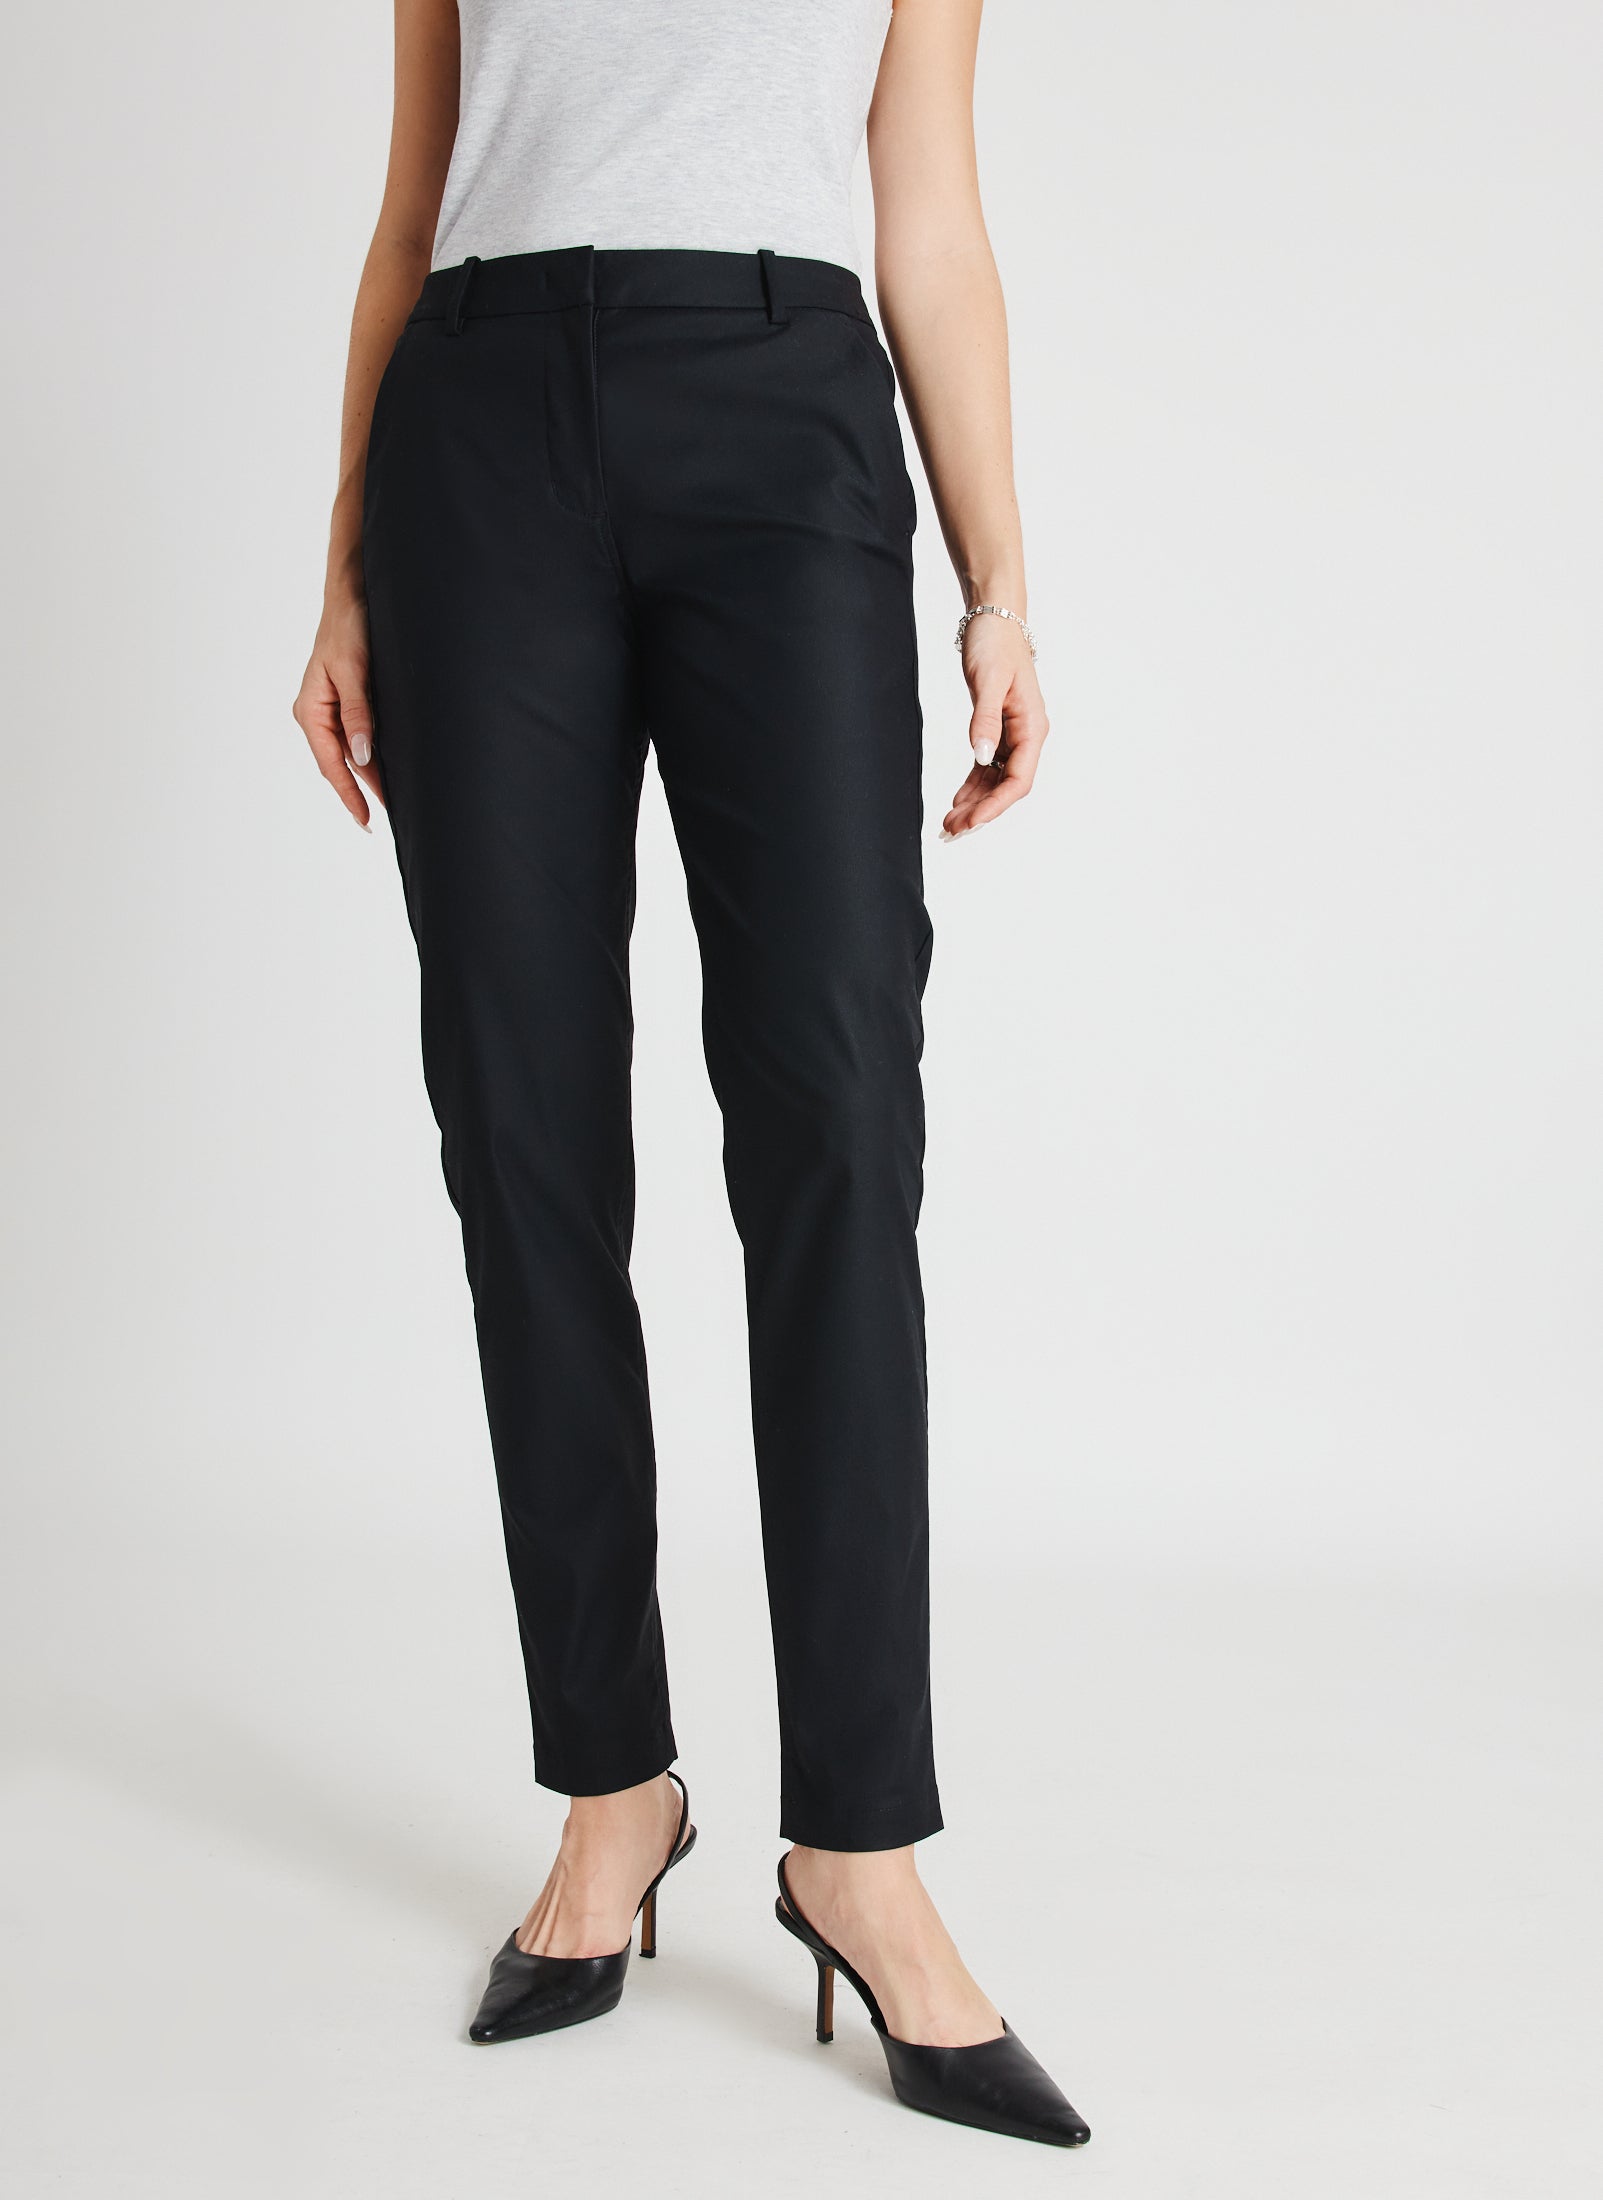 Is it Just me, or are Cheap Tall Pajama Pants for Women Virtually